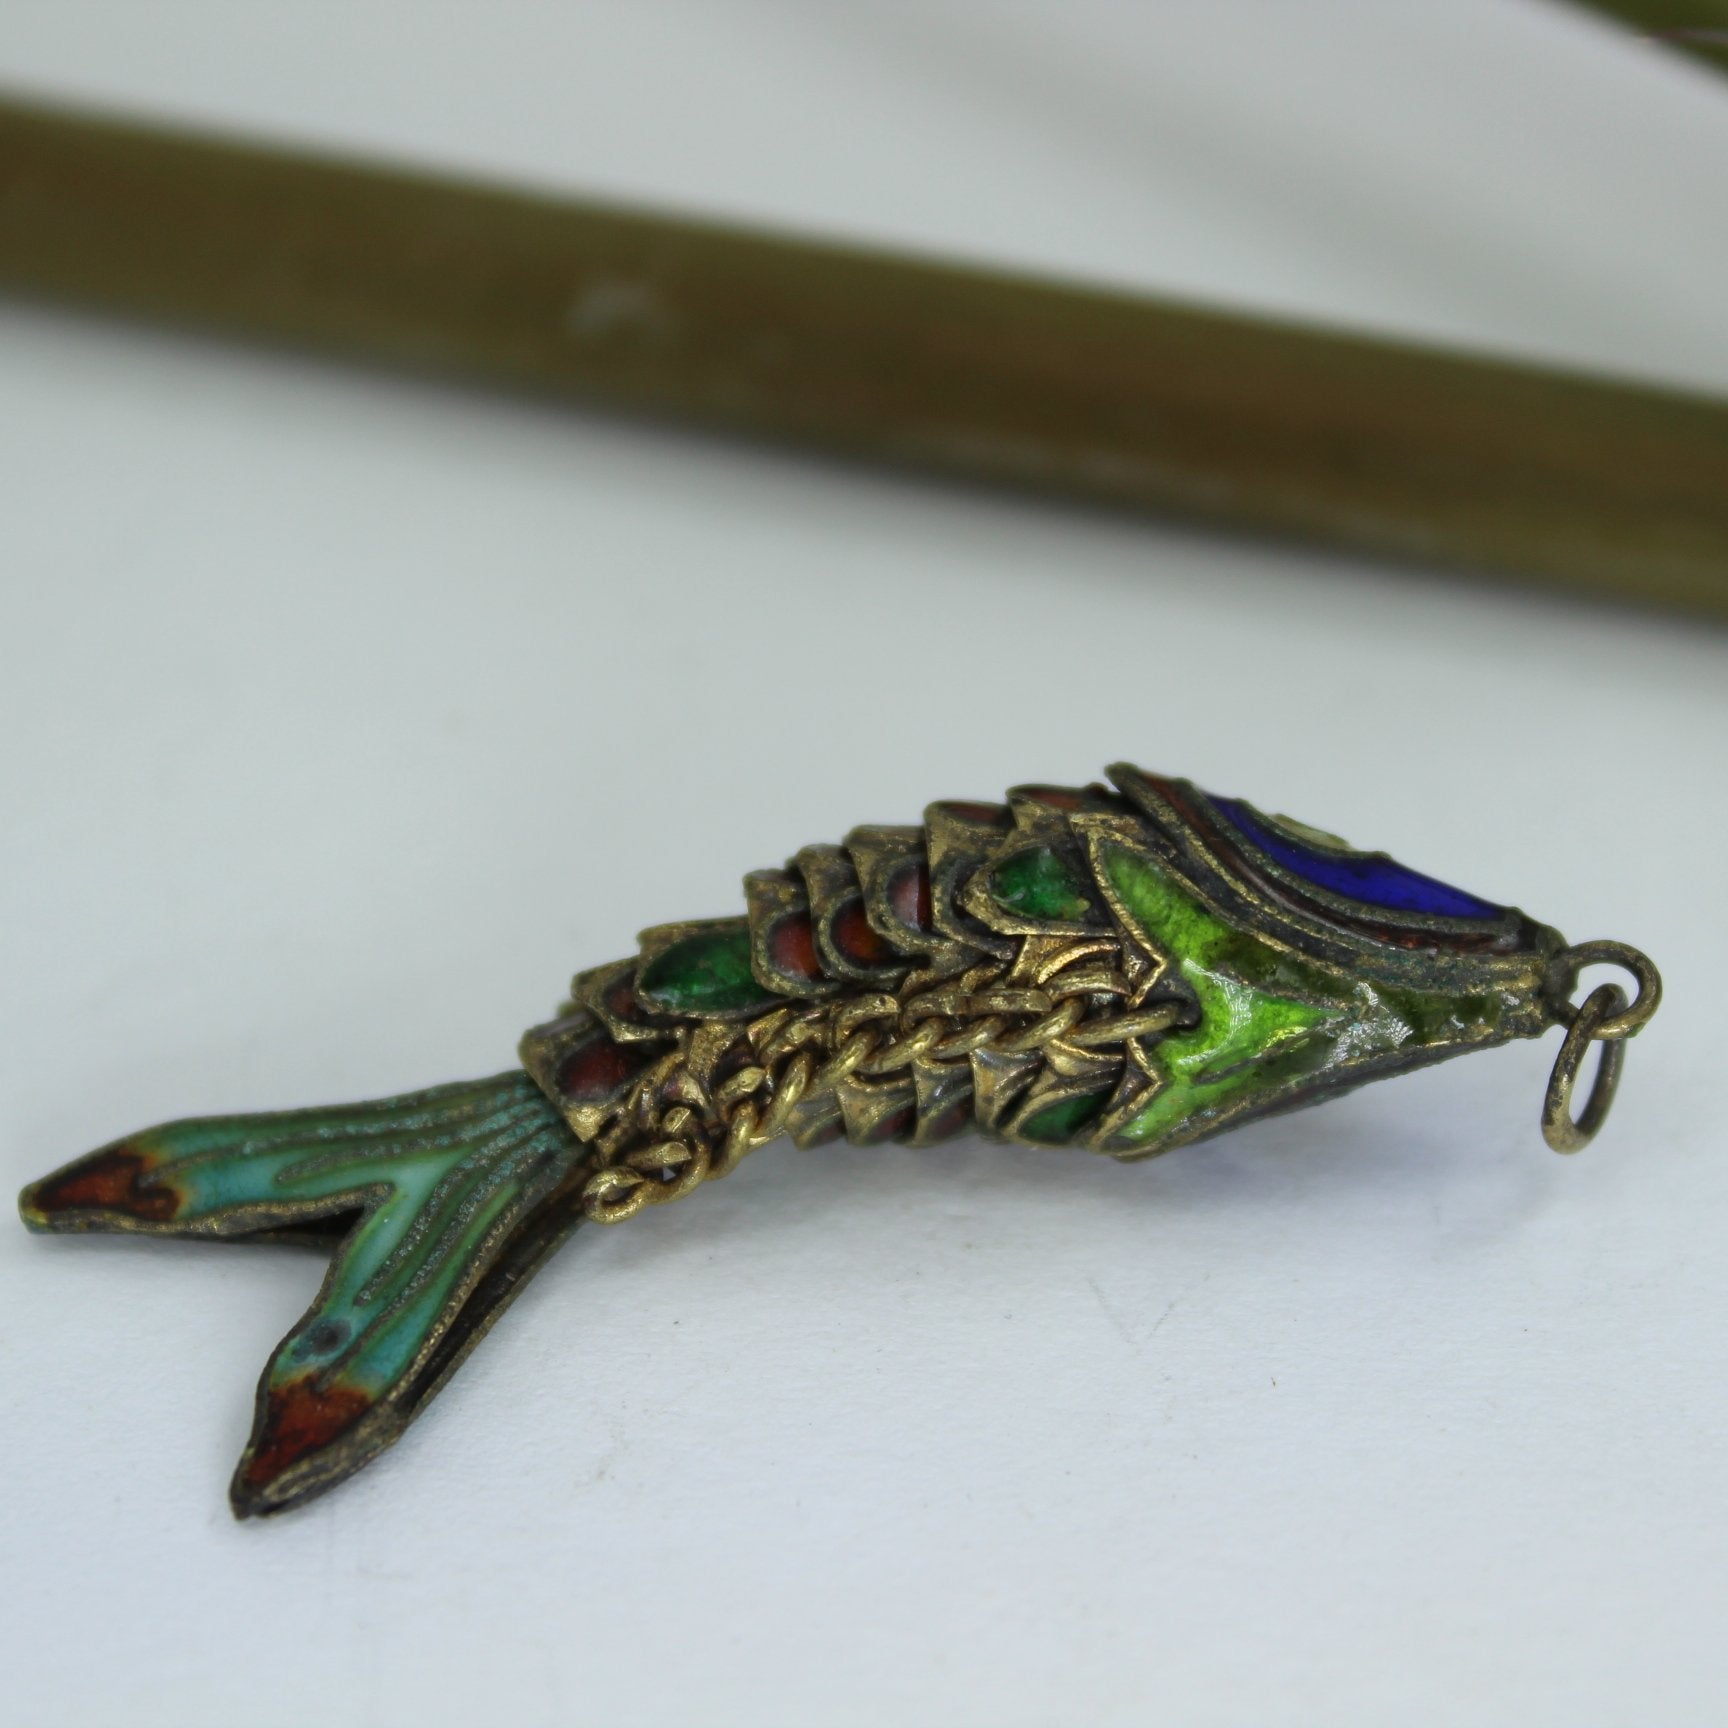 Enamel Cloisonne Pendant Articulated Fish Colorful Cobalt Aqua Green Red bottom of fish chain construction